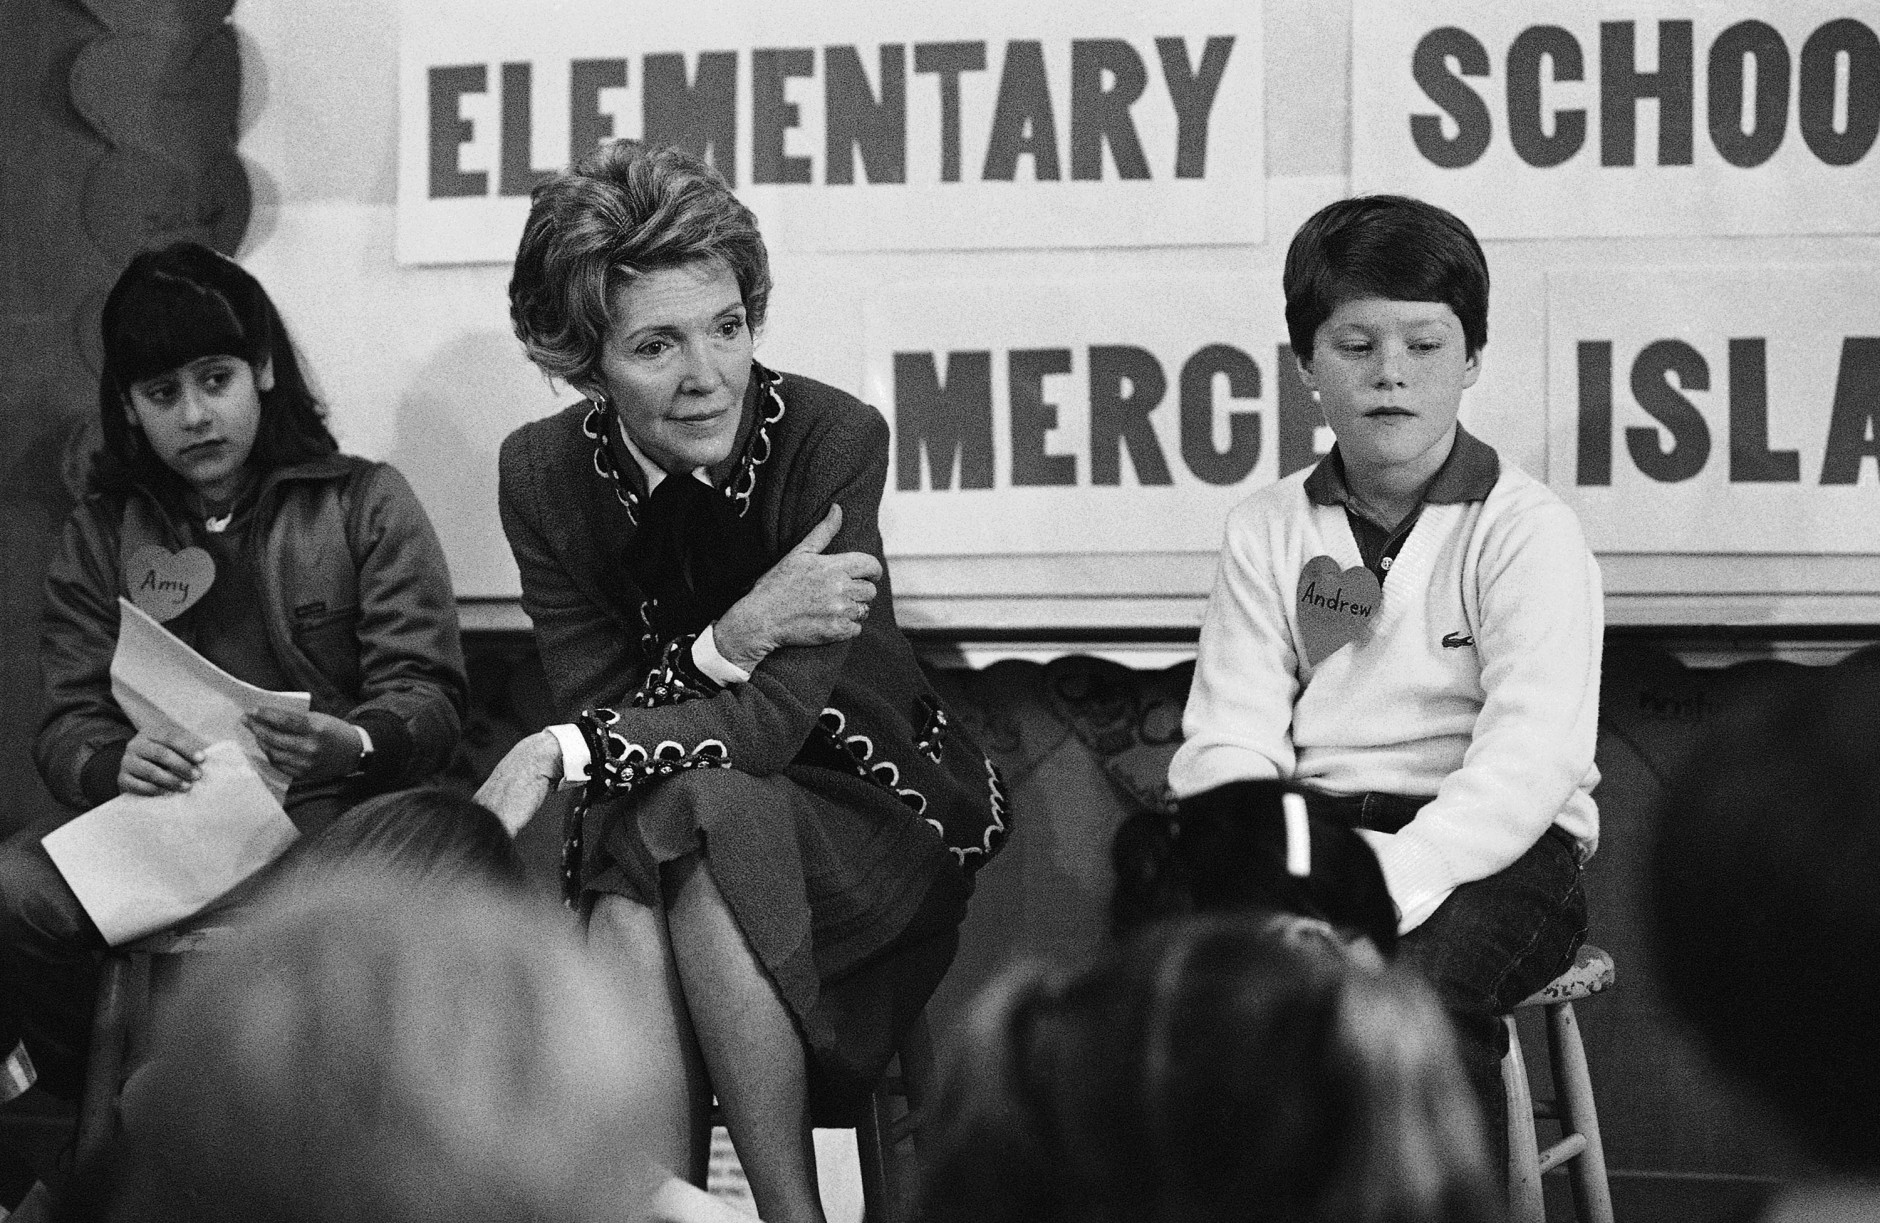 FILE - In this Feb. 14, 1984 file photo, first lady Nancy Reagan sits with a fourth and fifth grade class at Island Park Elementary School on Mercer Island, Wash. where she participated in a drug education class. At left is Amy Clarfeld, 10, and Andrew Cary, 10, is at right. During a visit with schoolchildren in Oakland, Calif., Reagan later recalled, "A little girl raised her hand and said, 'Mrs. Reagan, what do you do if somebody offers you drugs?' And I said, 'Well, you just say no.' And there it was born." On the occasion of  Legalization Day, Thursday, Dec. 6, 2012, when Washingtons new law takes effect, AP takes a look back at the cultural and legal status of the evil weed in American history. (AP Photo/Barry Sweet, File)